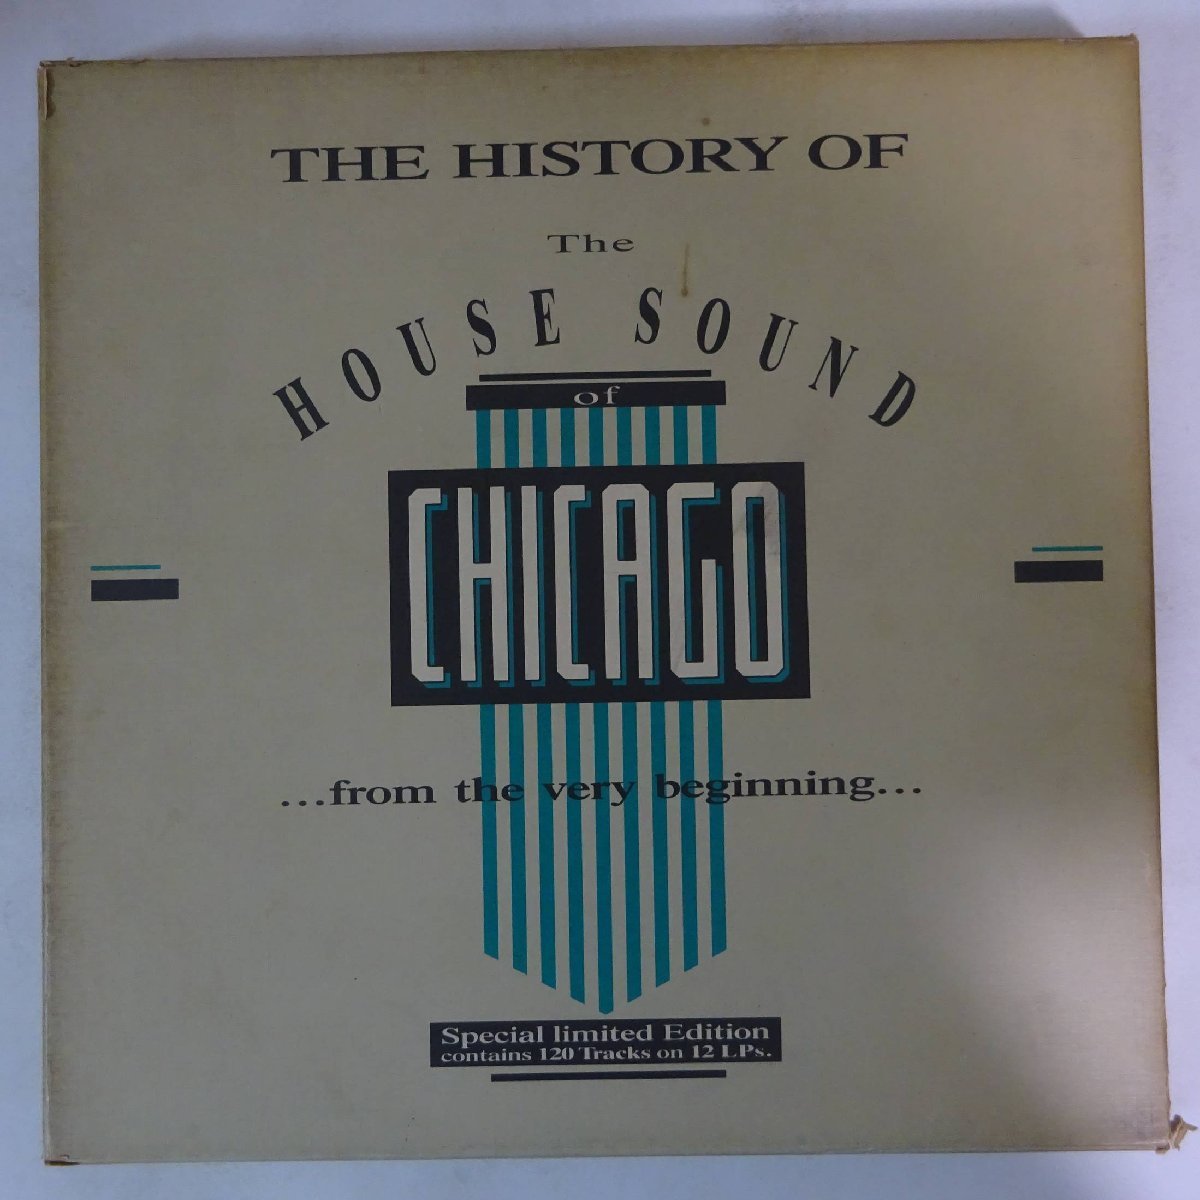 14025486;【Europe盤/12LP/BOX/限定プレス】V.A. / The History Of The House Sound Of Chicago (...From The Very Beginning...)_画像1